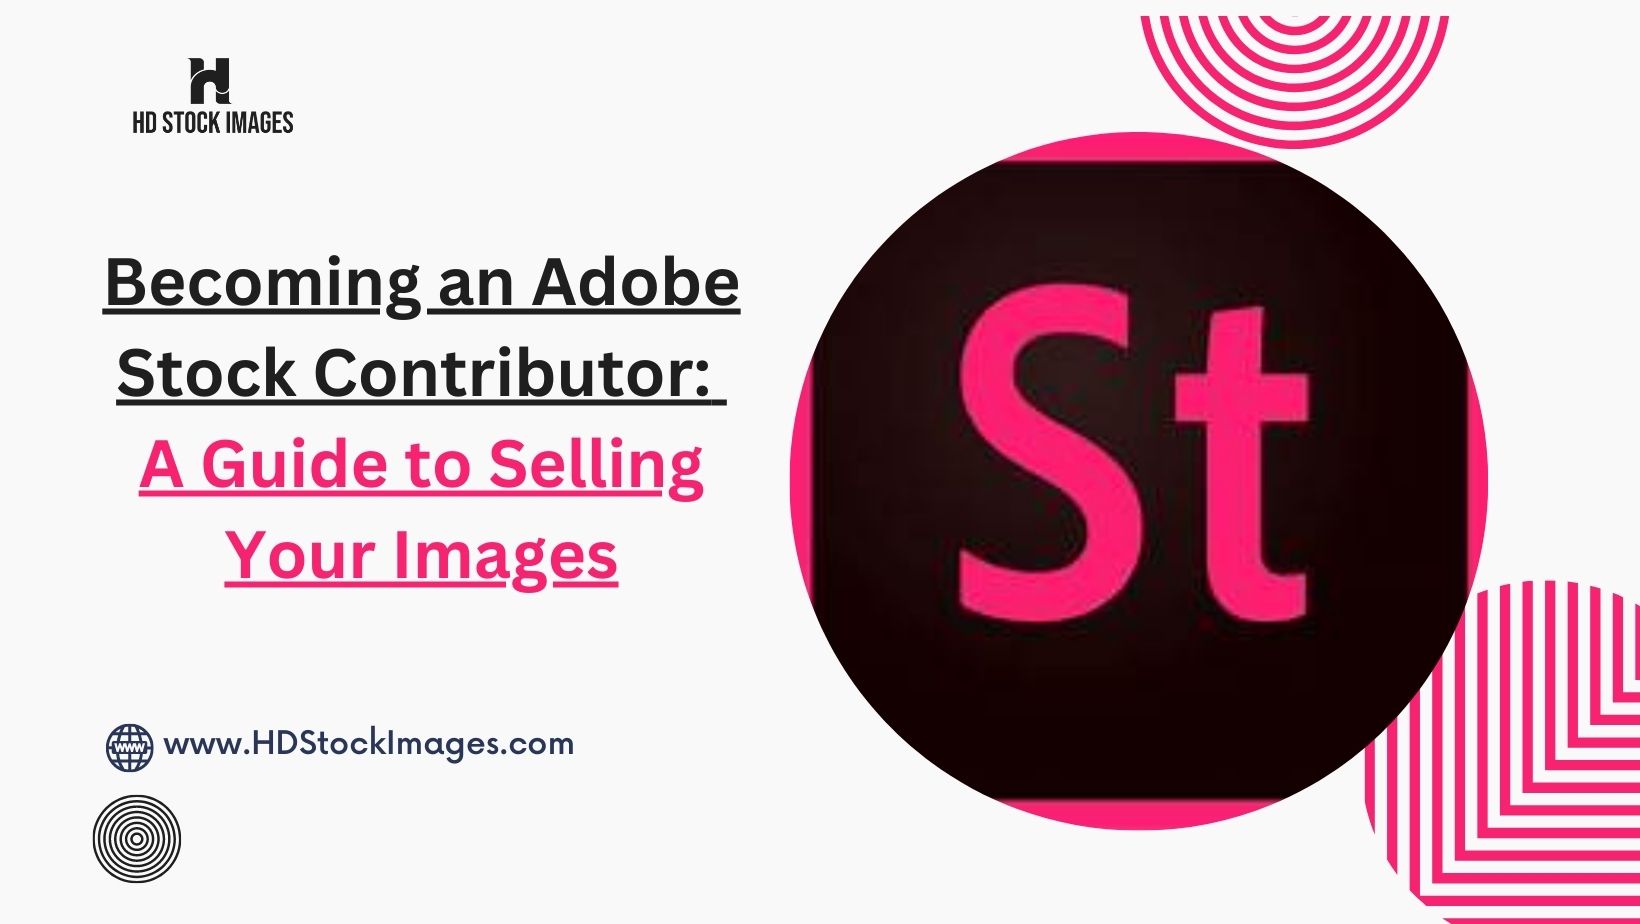 An image of Becoming an Adobe Stock Contributor: A Guide to Selling Your Images